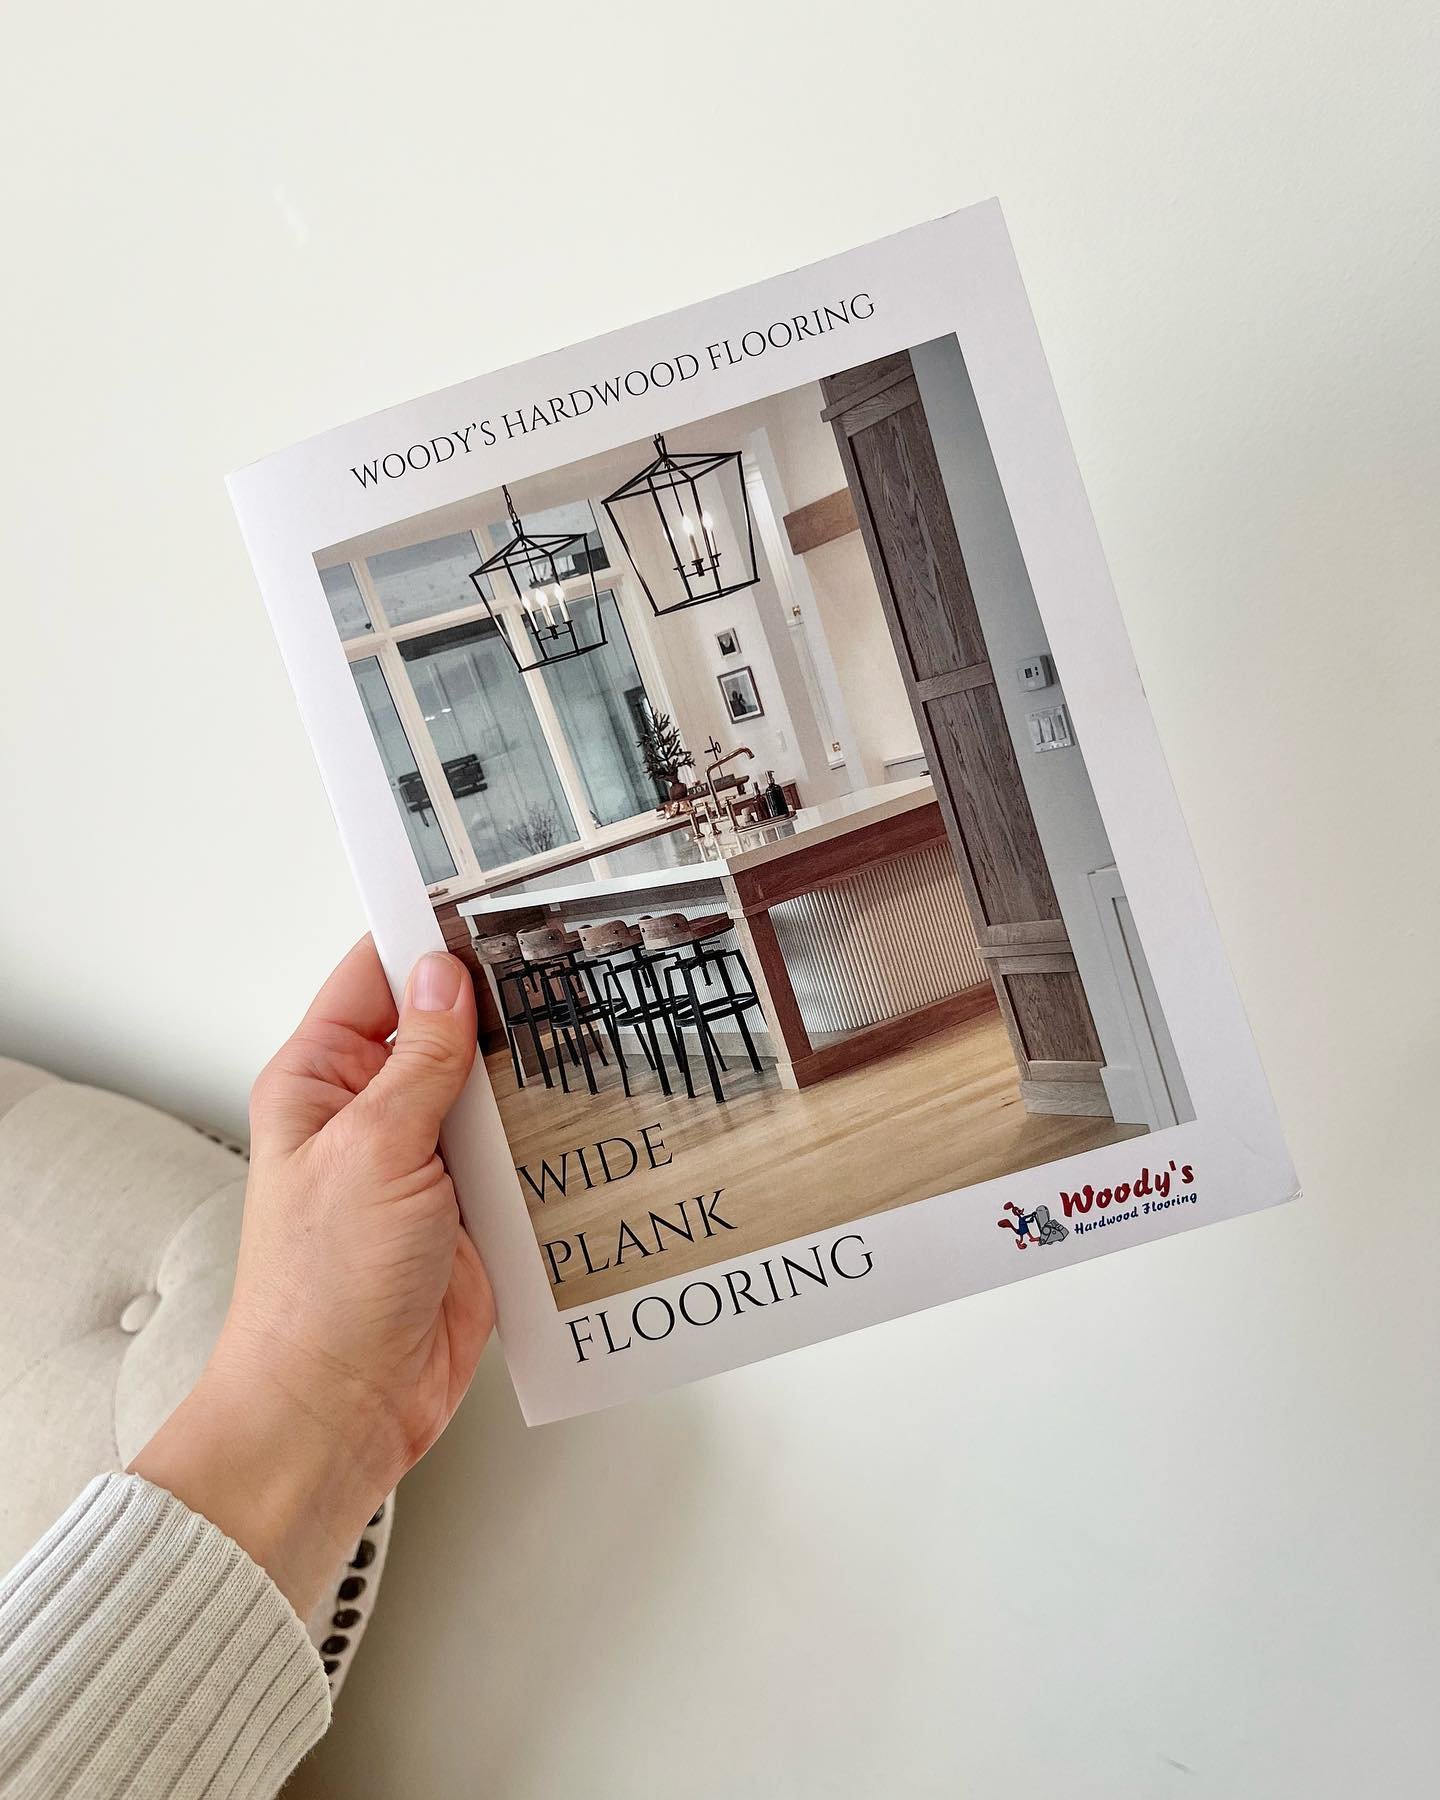 I am very pleased with how this Booklet for Woody&rsquo;s Hardwood Flooring came together. 

We made sure to print it on high quality paper with a mat finish. 

Doing those two things took it over the top for that high quantity and beautiful look!